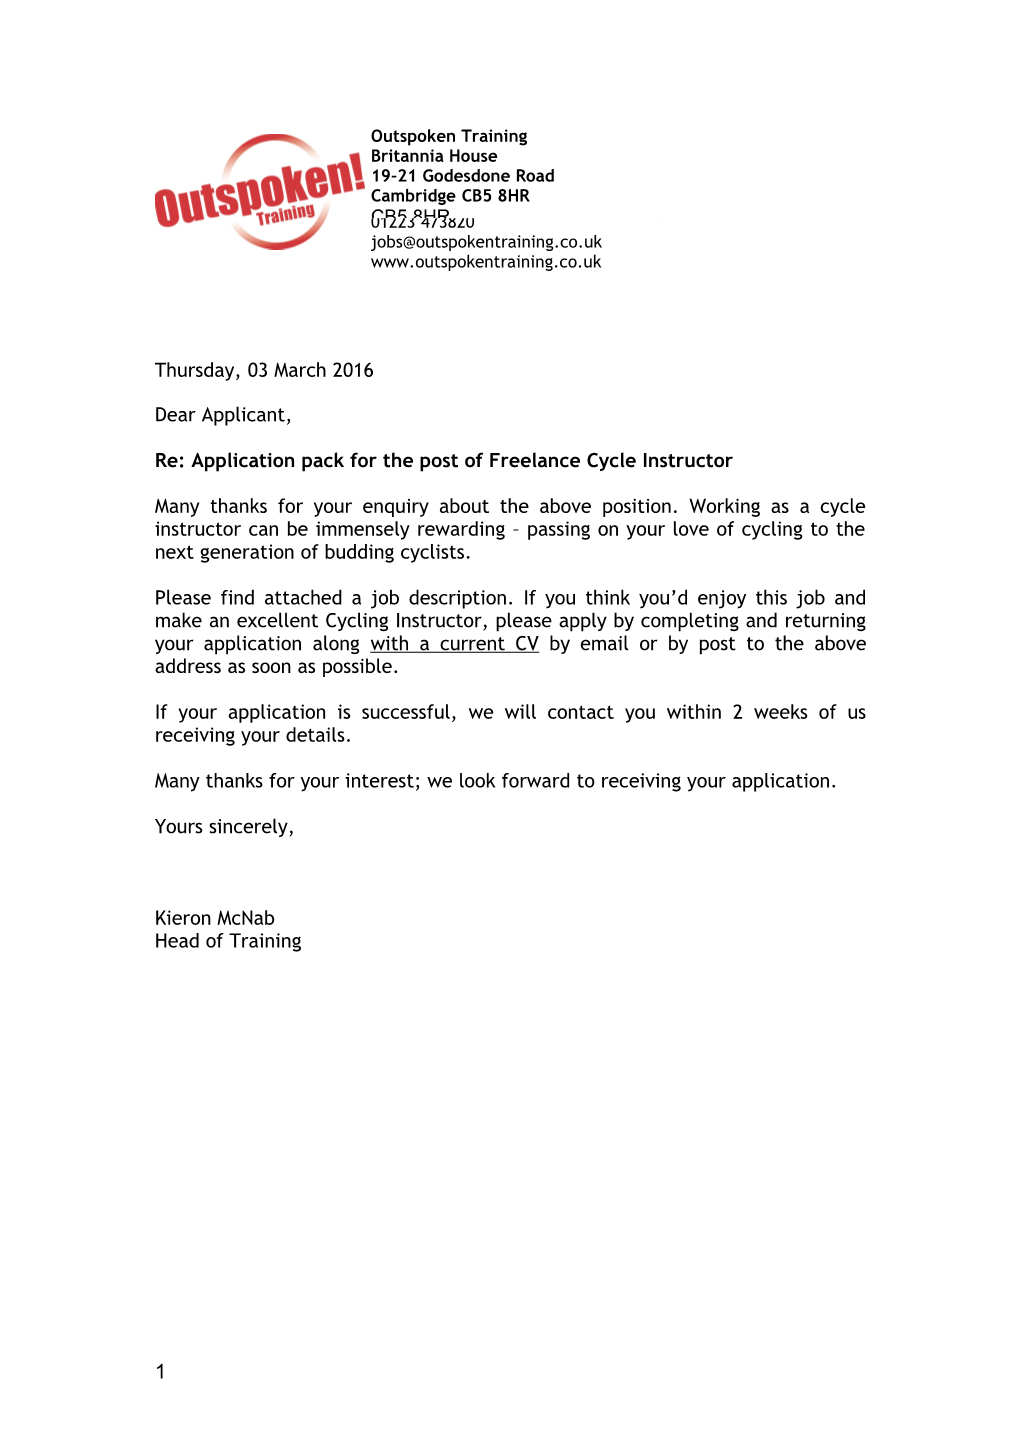 Re: Application Pack for the Post of Freelance Cycle Instructor